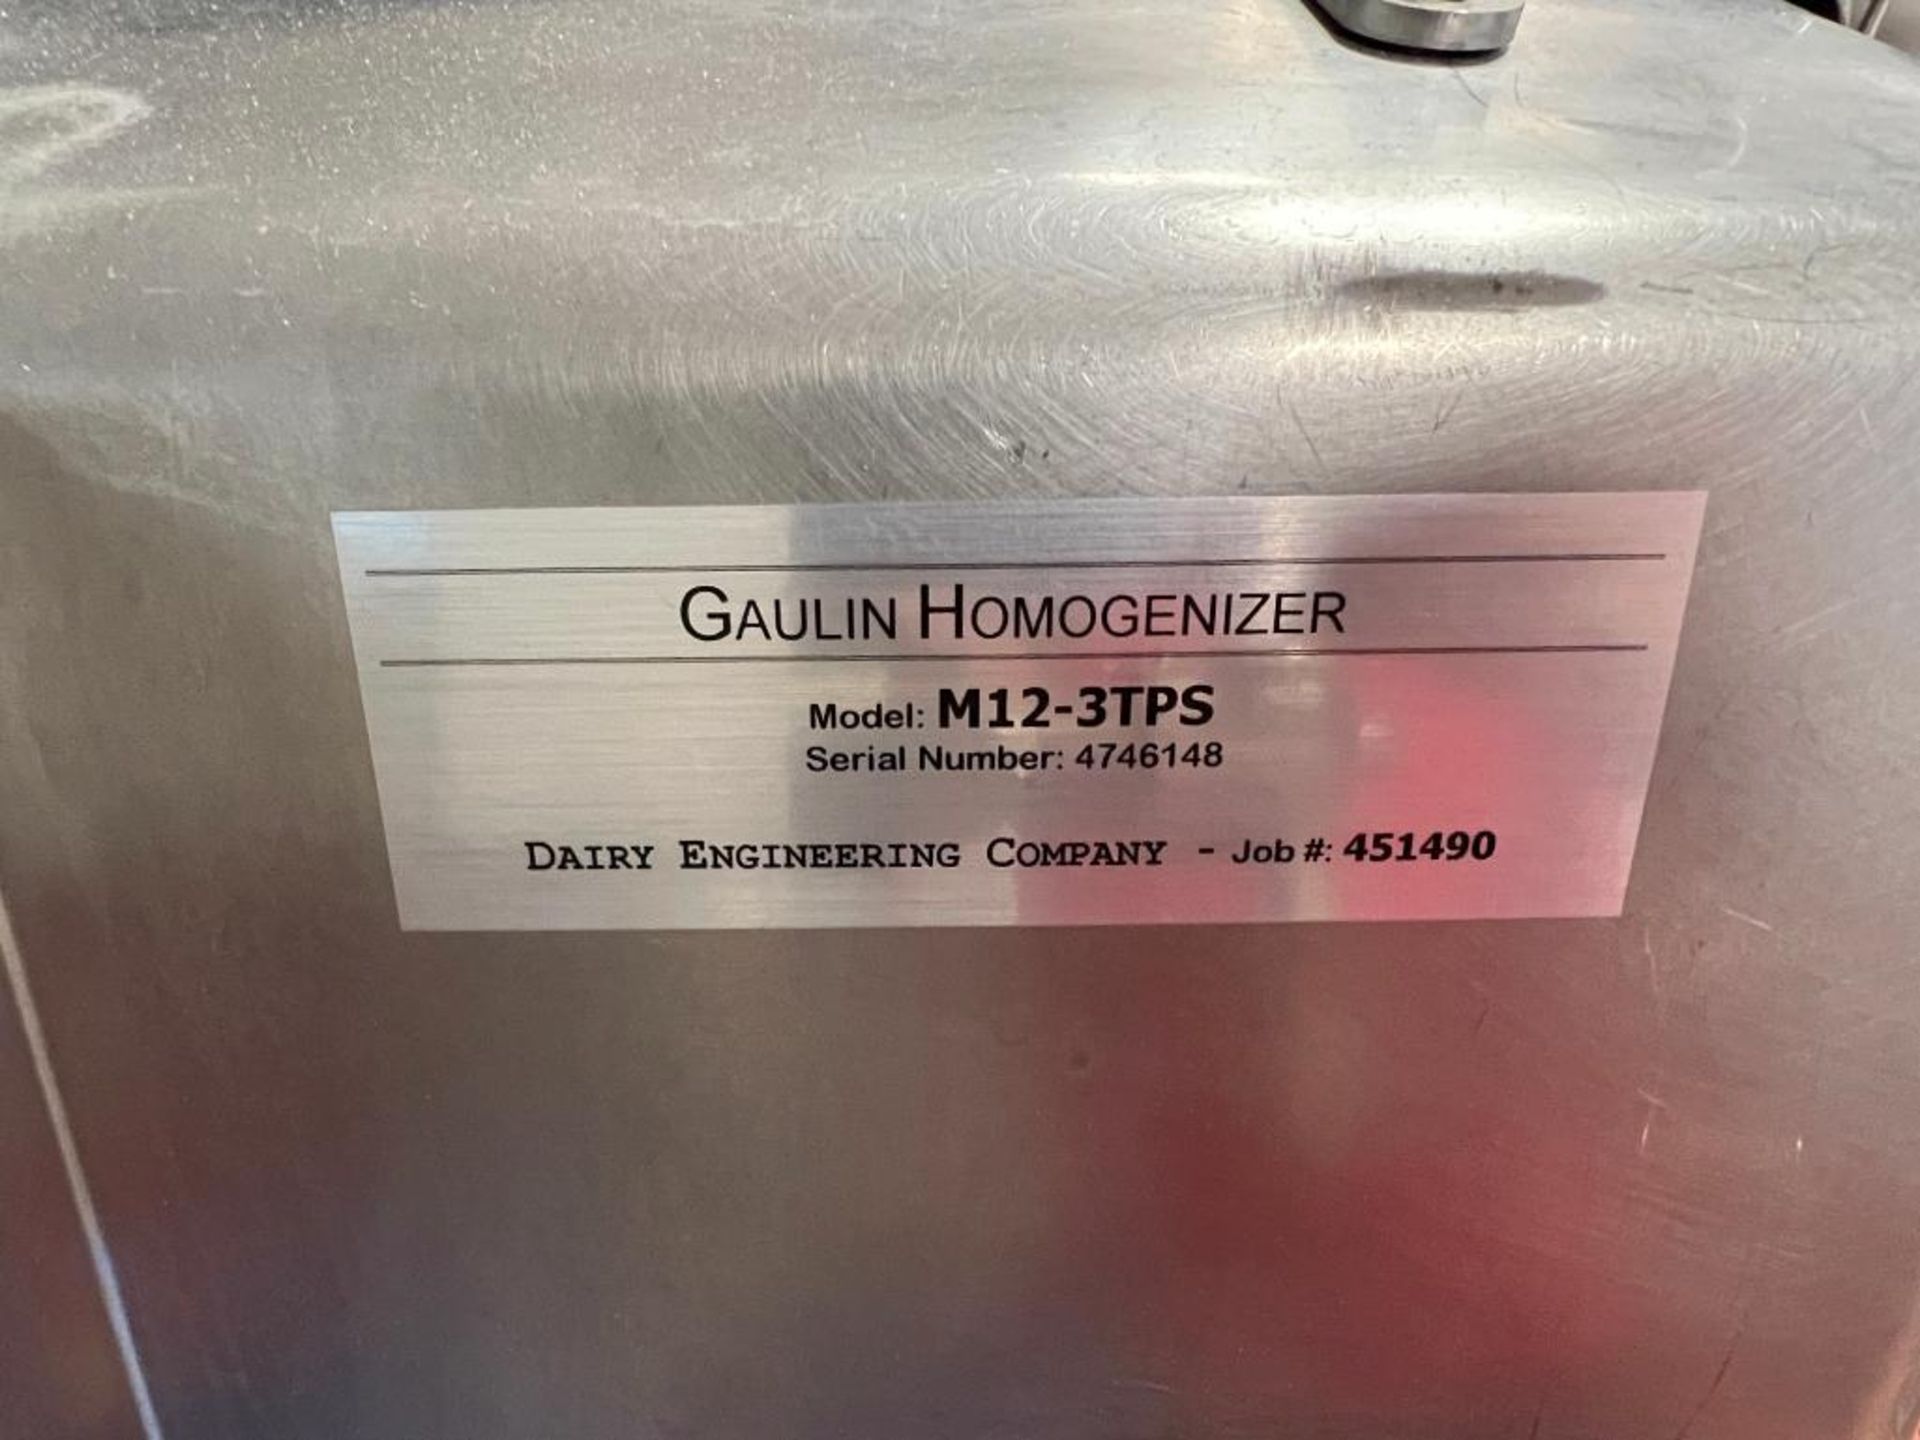 Gaulin Homogenizer, Model: M12-3TPS, S/N: 4746148 with Stop Gap (Inspected by Dairy Engineering - Image 4 of 4